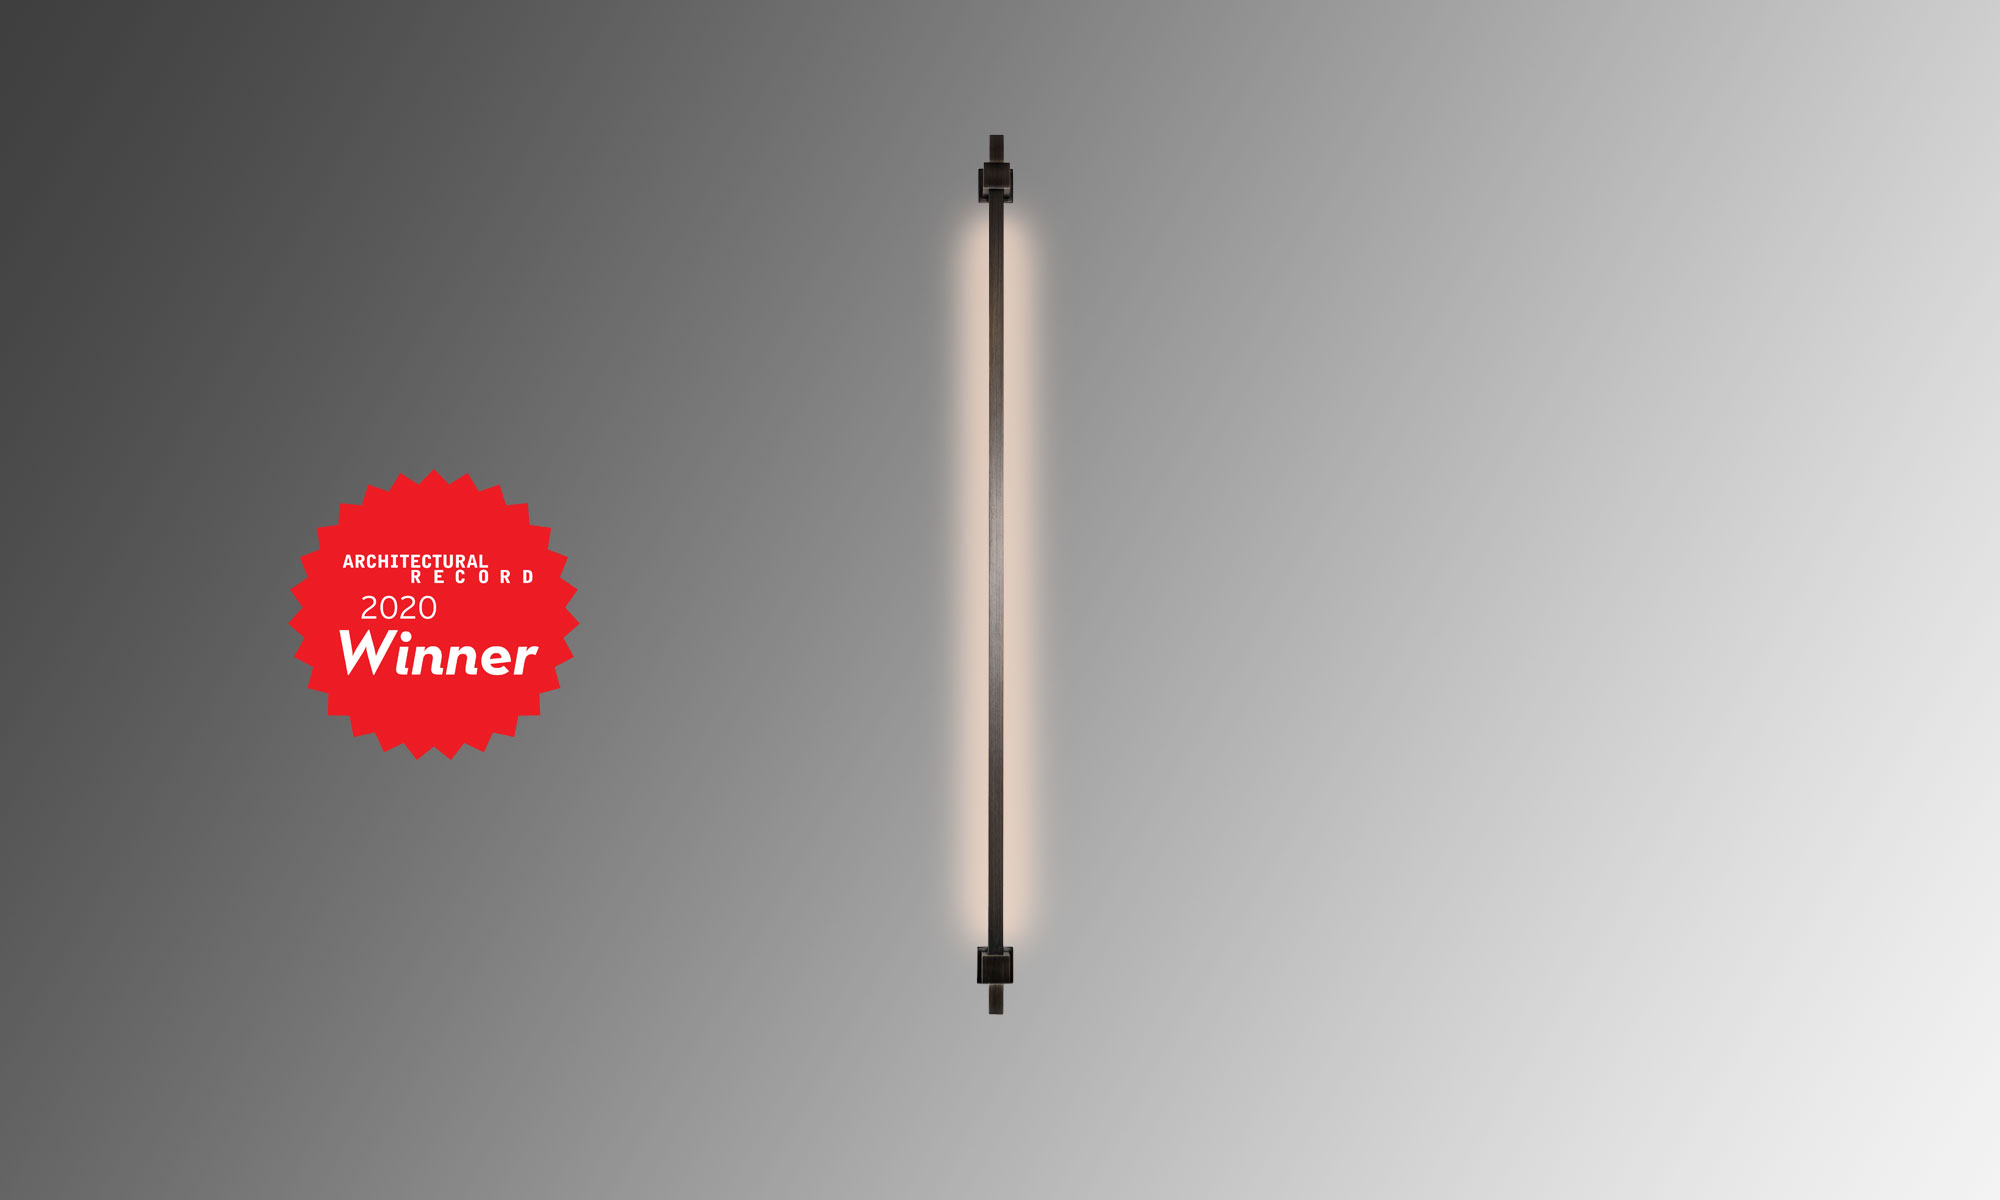 The Axis Sconce - The Axis Sconce can be rotated up to 280 degrees to ensure that it provides the light where you want when you want it. Winner of Architectural Record's 2020 Lighting Product of the Year. Designed by Schuyler Sweet